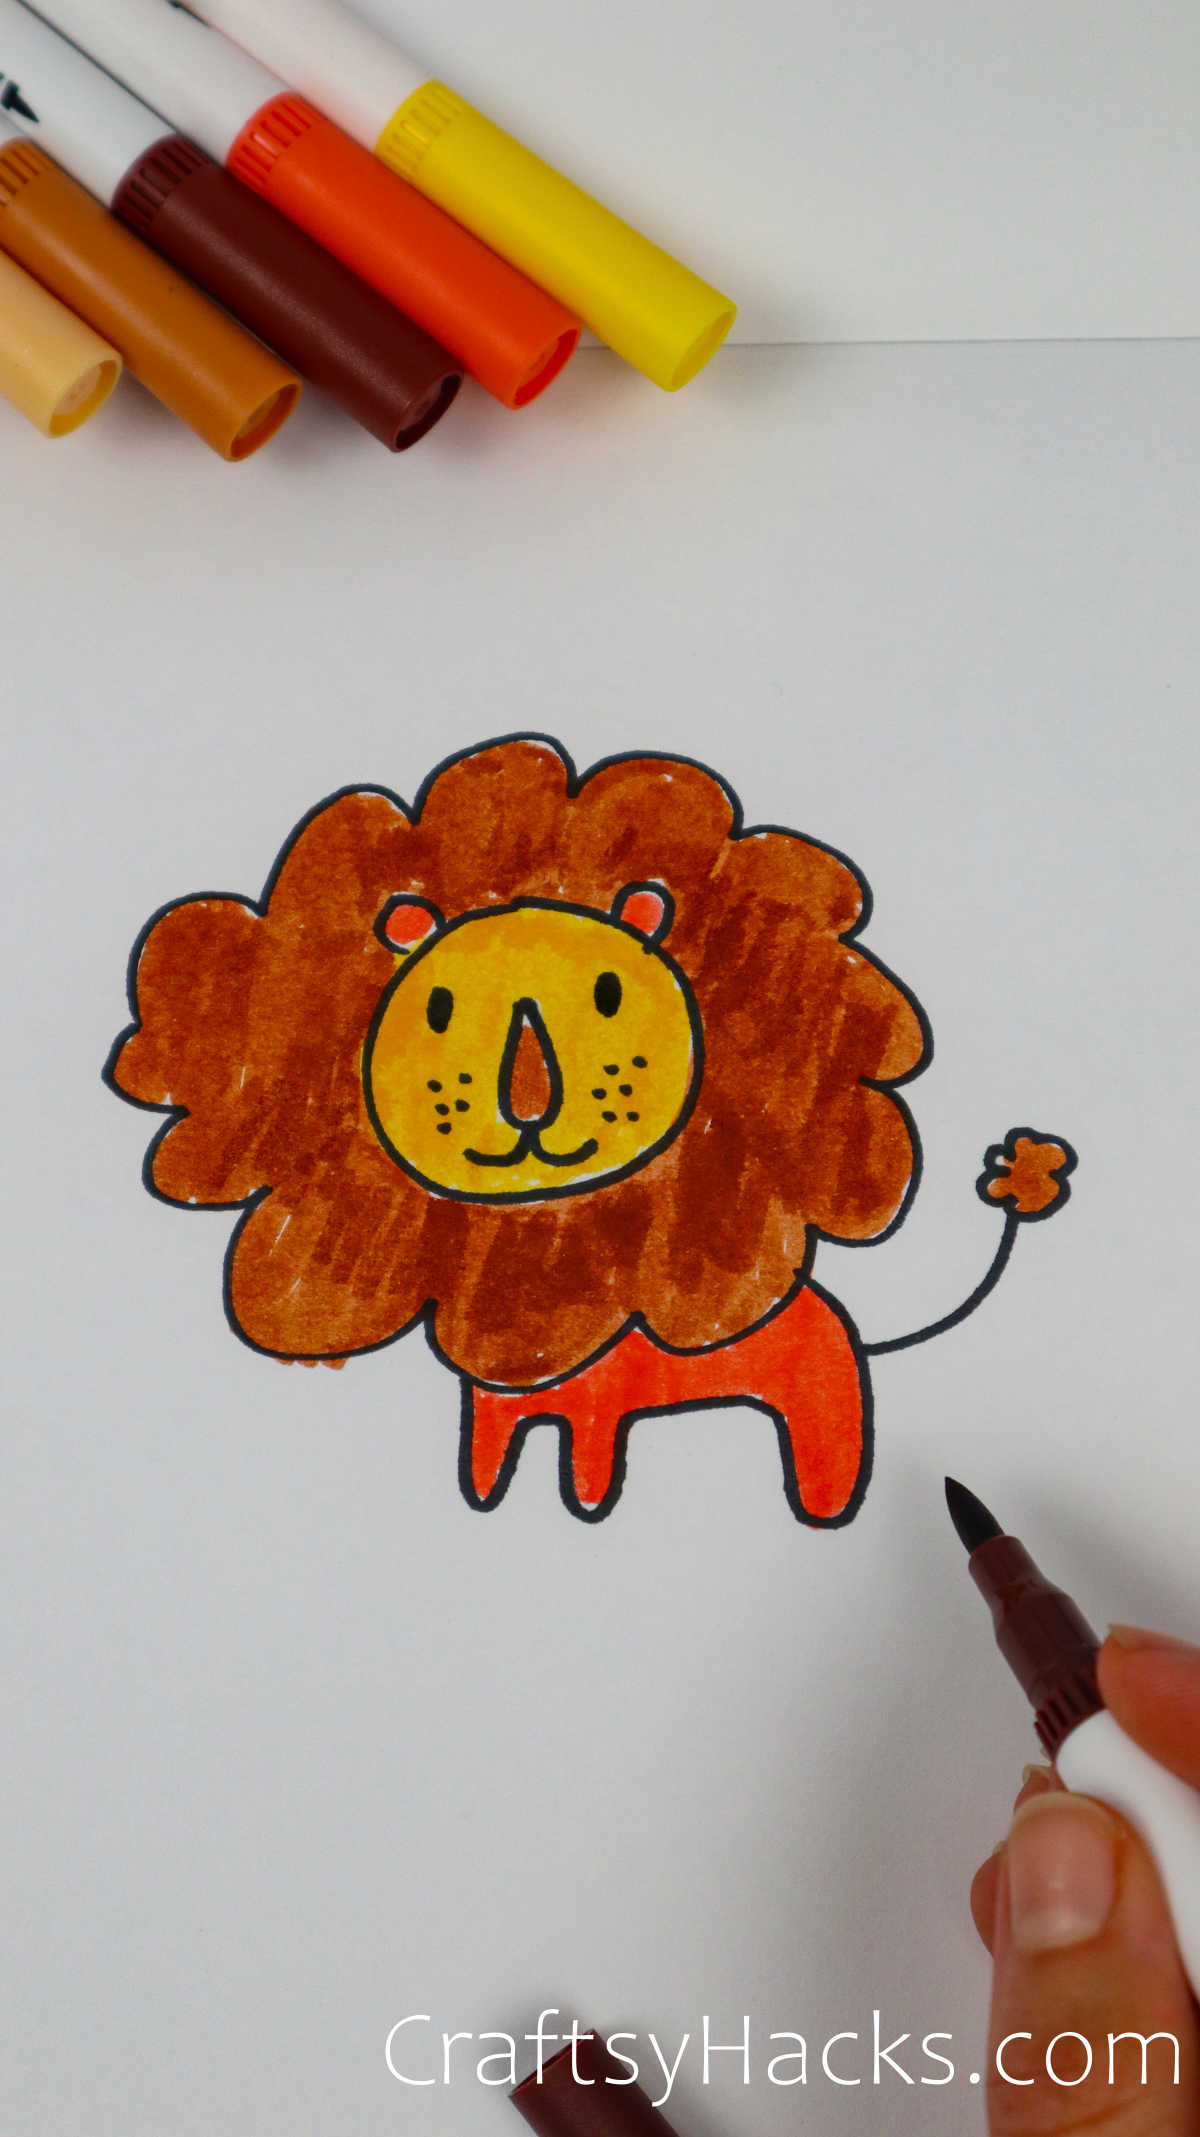 40 Easy Drawing Ideas for Kids - Craftsy Hacks